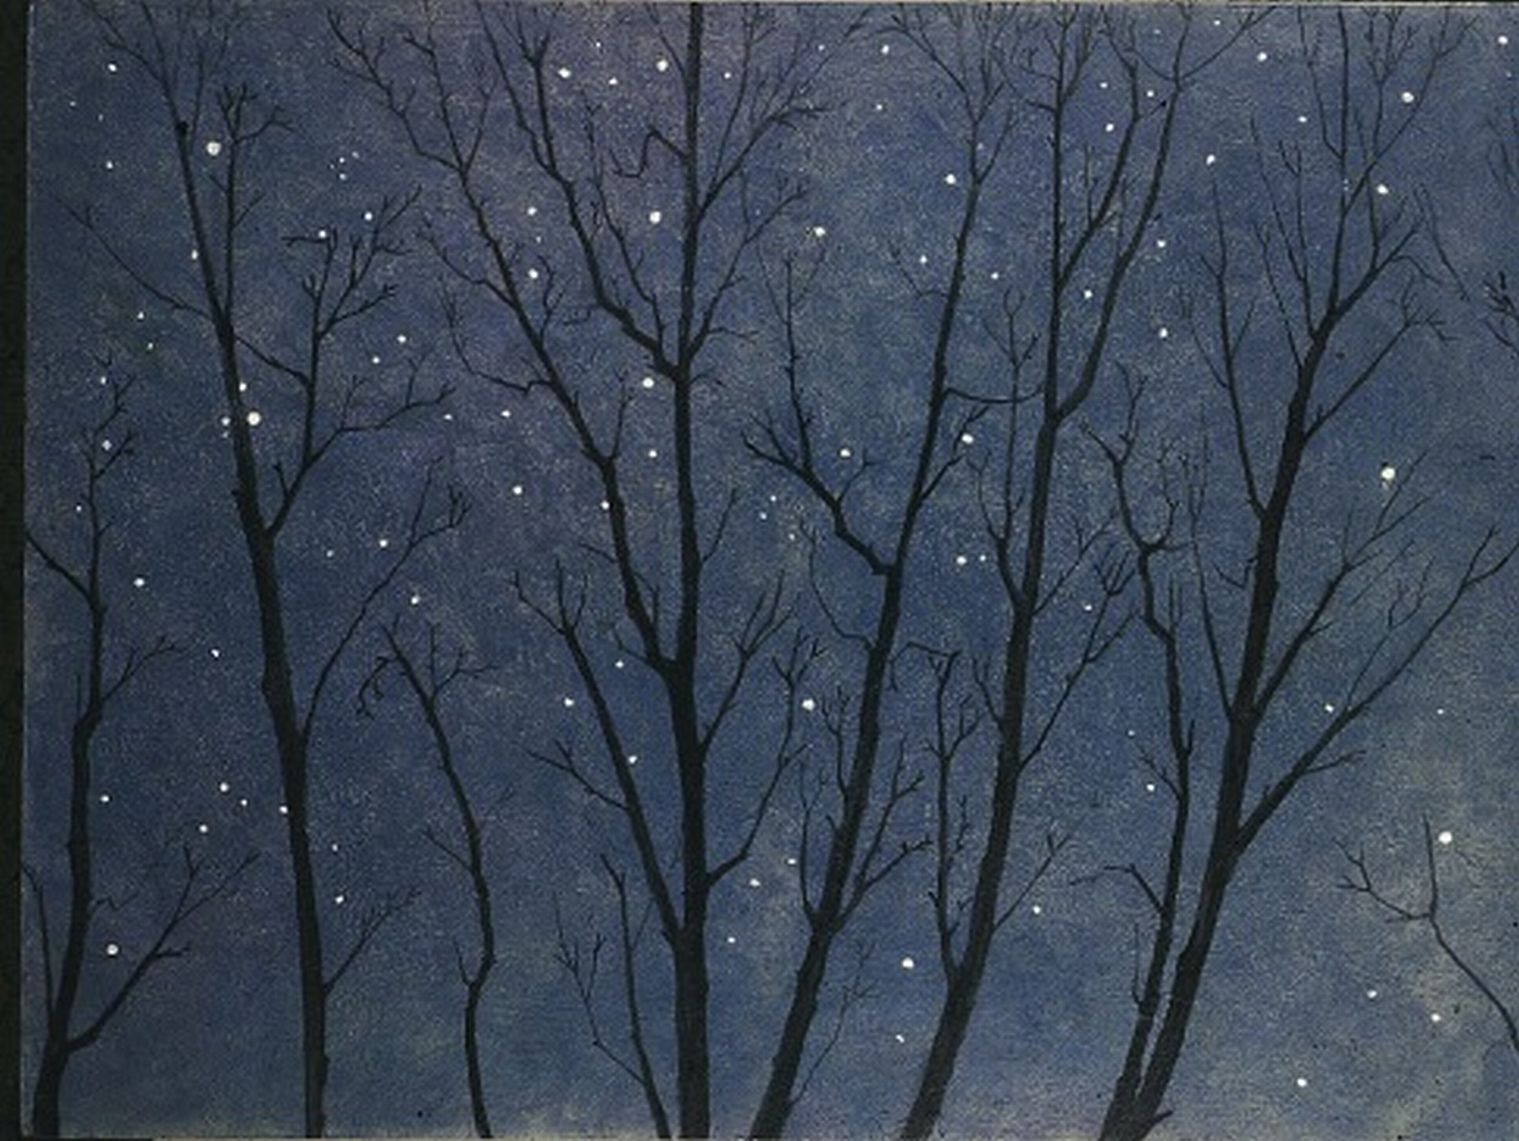 image of "Night Sky at Winter through Tree Branches" by Susan Chambers